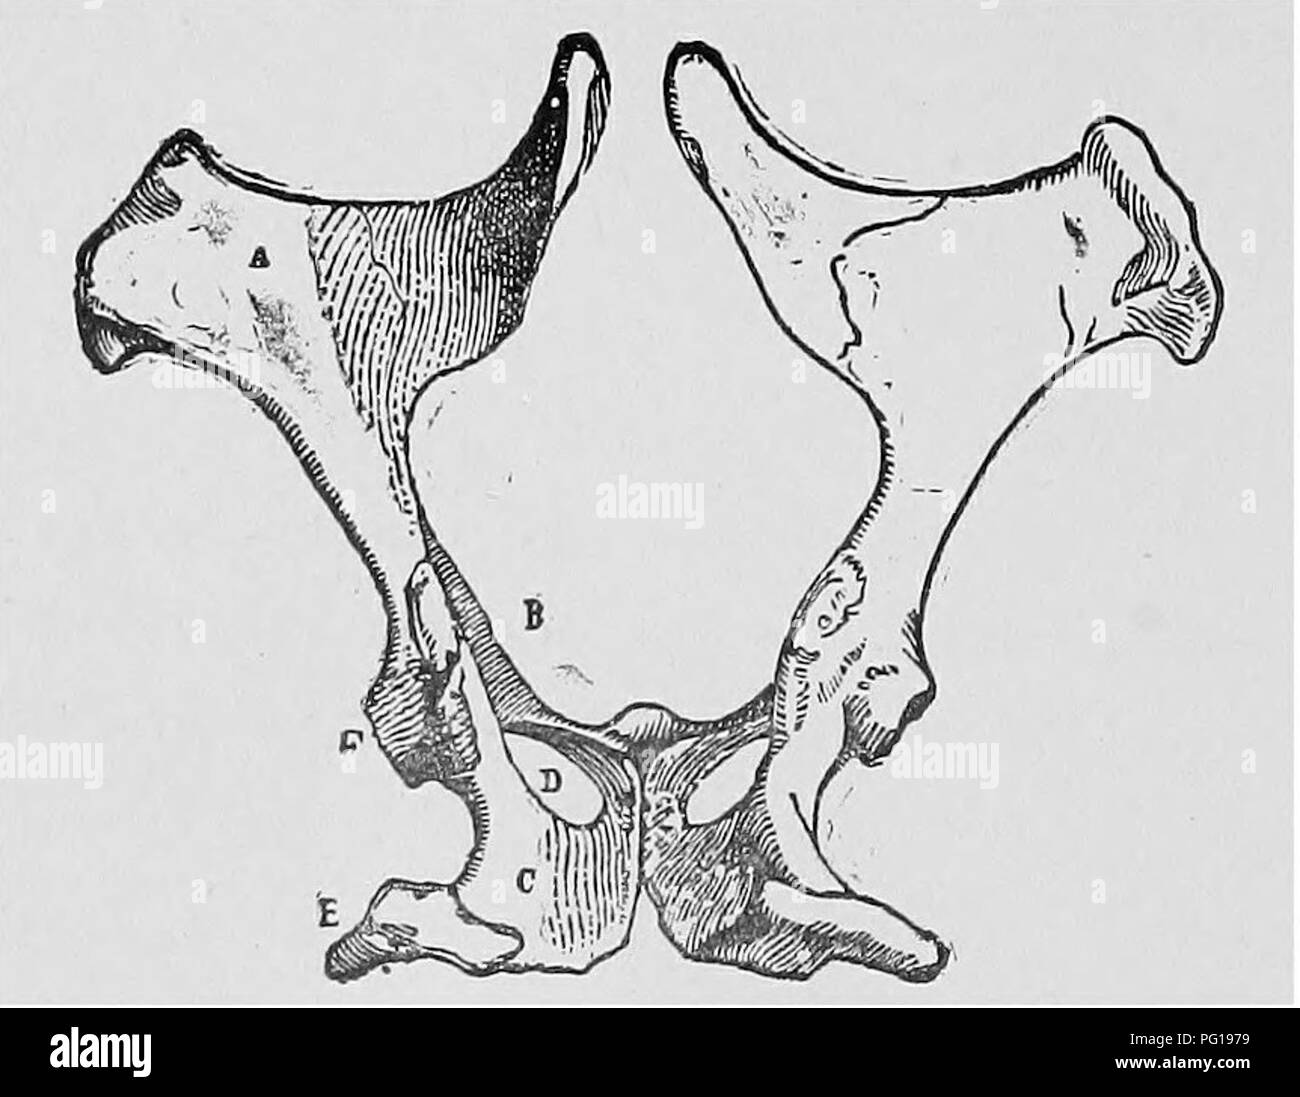 . Veterinary obstetrics; a compendium for the use of students and practitioners. Veterinary obstetrics. ' 8 VETERINARY OBSTETRICS. which the sacro-sciatic ligament is fixed. Below the cavity, and inclining- Inwards, is a large circular open- ing, occupied by the obturator muscles and known as. the foramen ovale, or obturator foramen. The two- ossa innominata are united in the middle line inferiorly and posteriorly by a solid sutureâthe symphysis- pubis, or ischio-pubic symphysis. Above they articulate with the sacrum.. Fig. I. Pelvis of the Mare. A, Ilium; B, Pubis; C, Ischium; D, Foramen Oval Stock Photo